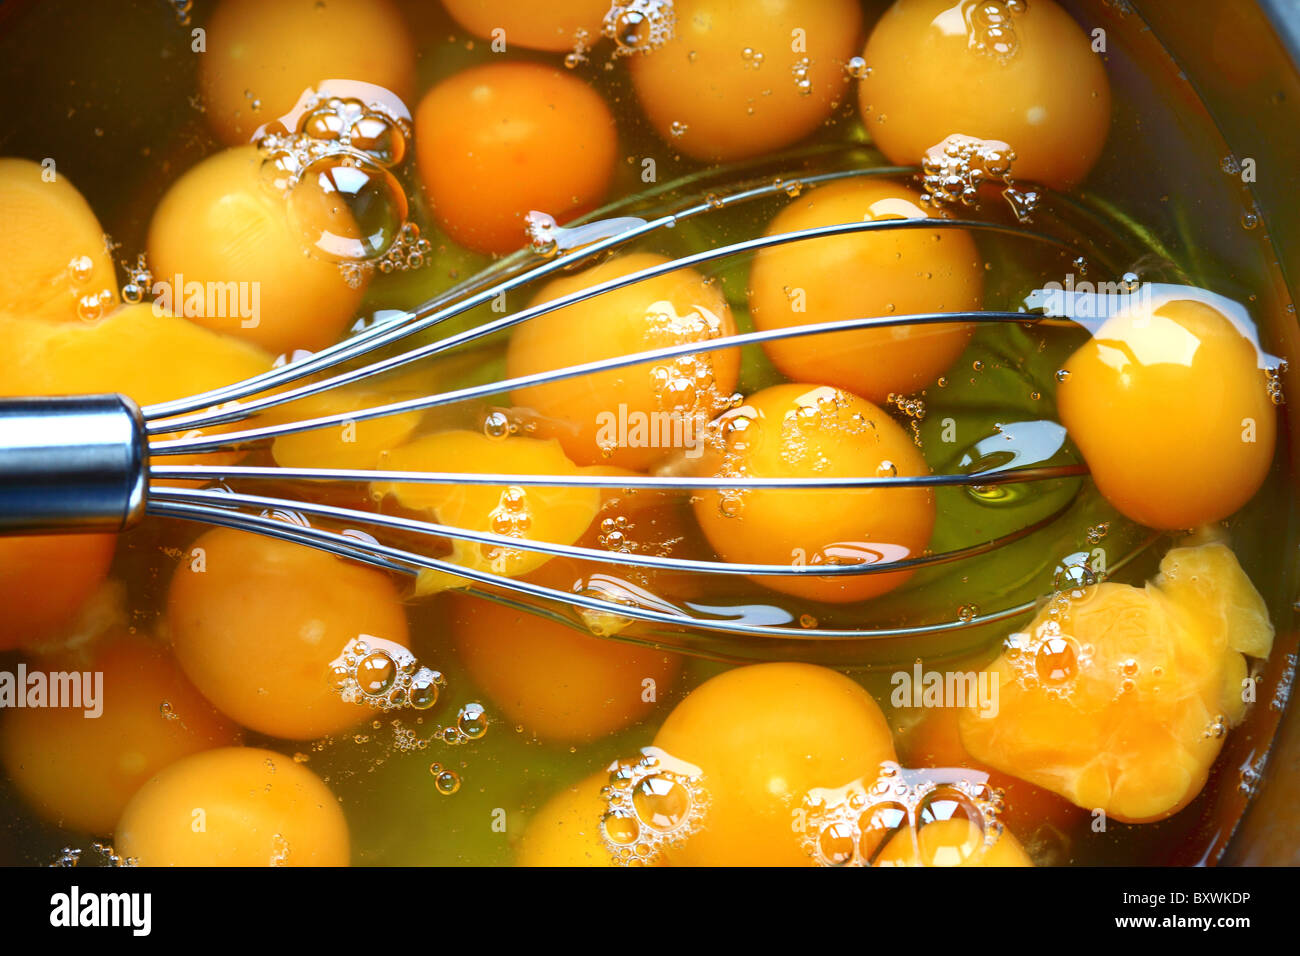 Raw eggs in a bowl, egg white and egg yolk, eggbeater, ready to whisk. Stock Photo